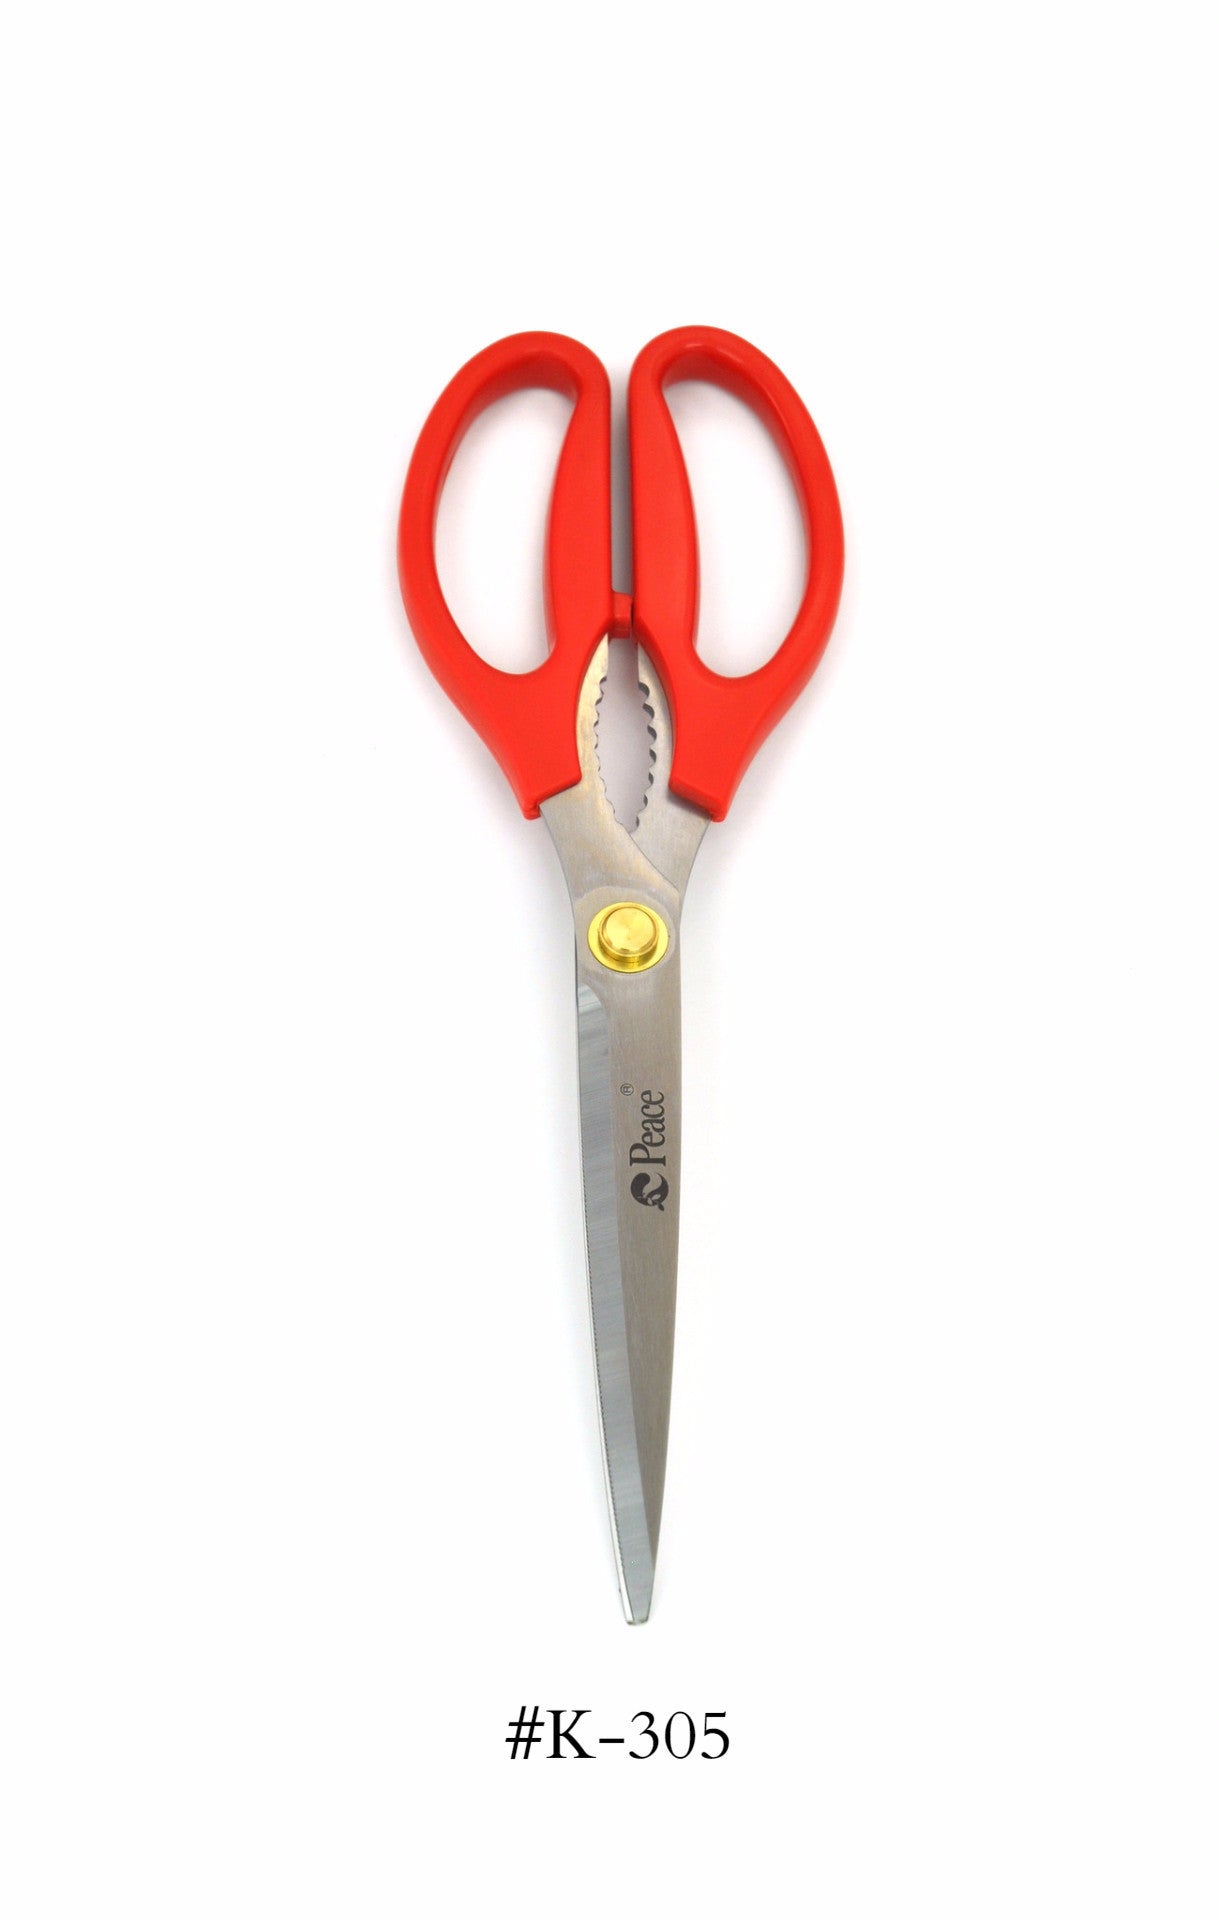 VICHICOO VF8-60 Professional Barber Scissors Hairdressing Supplies